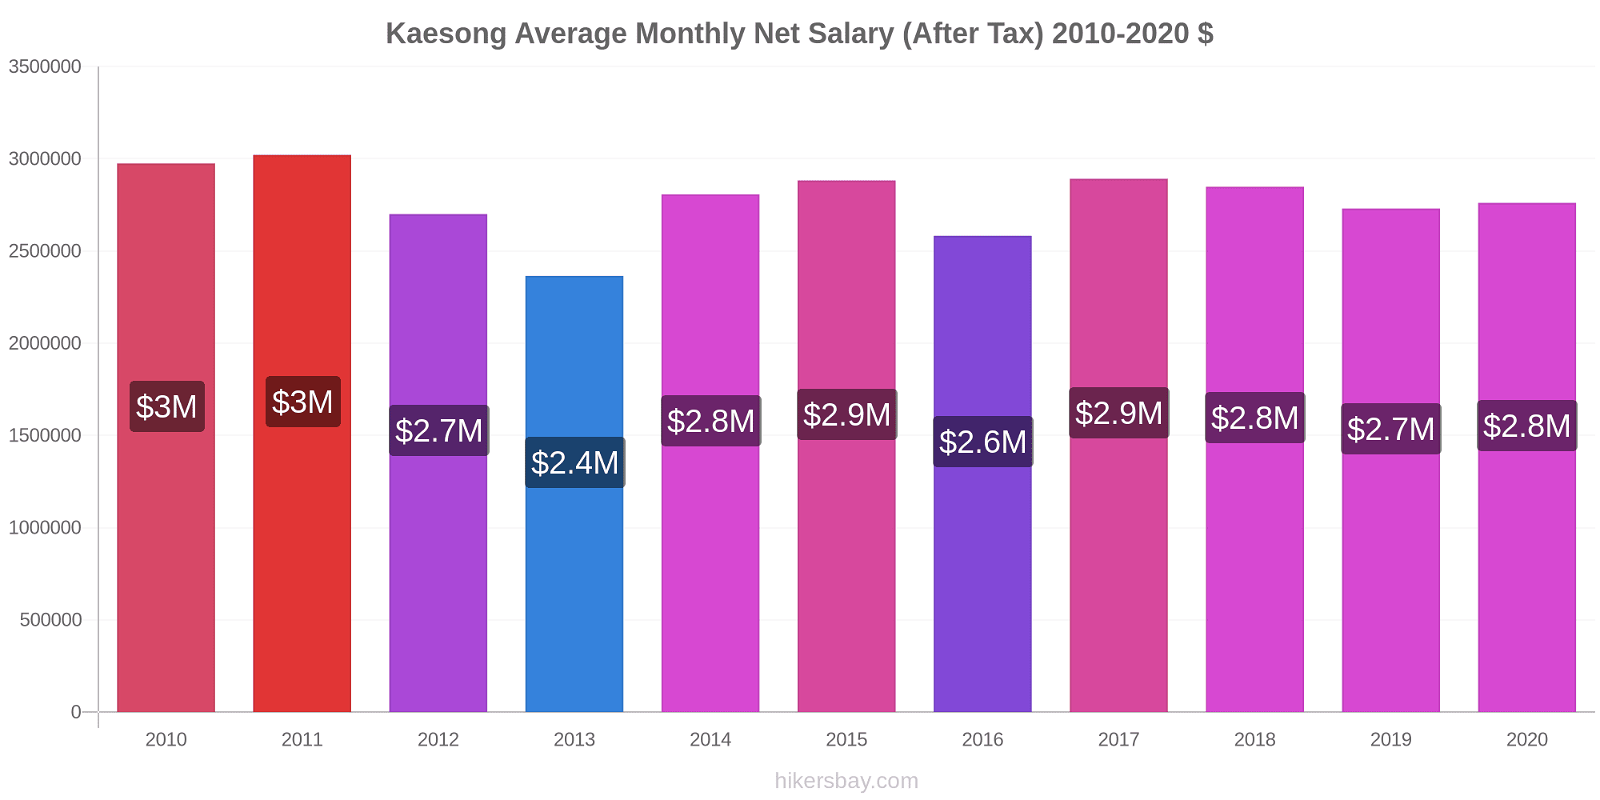 Kaesong price changes Average Monthly Net Salary (After Tax) hikersbay.com